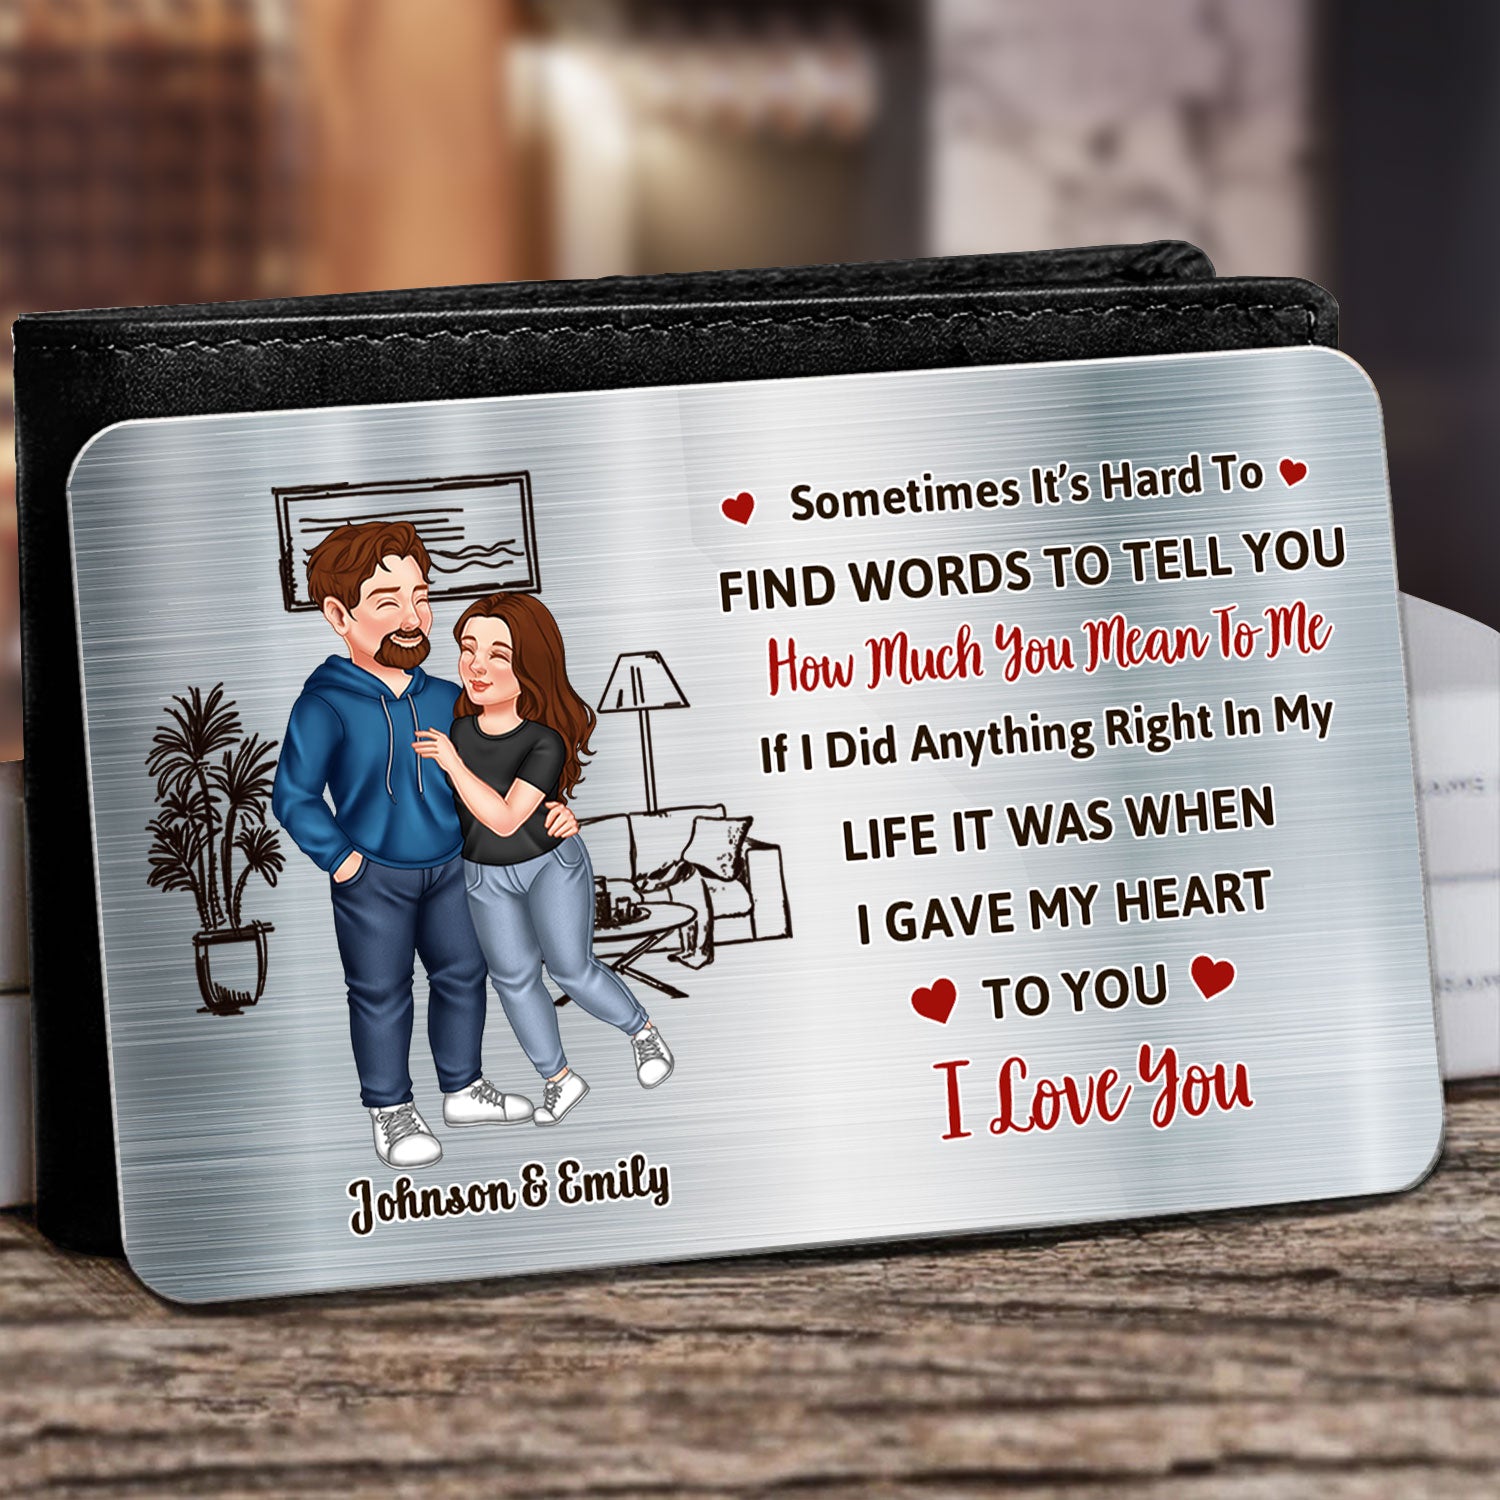 Personalized Wallet Cards - Shah Prints